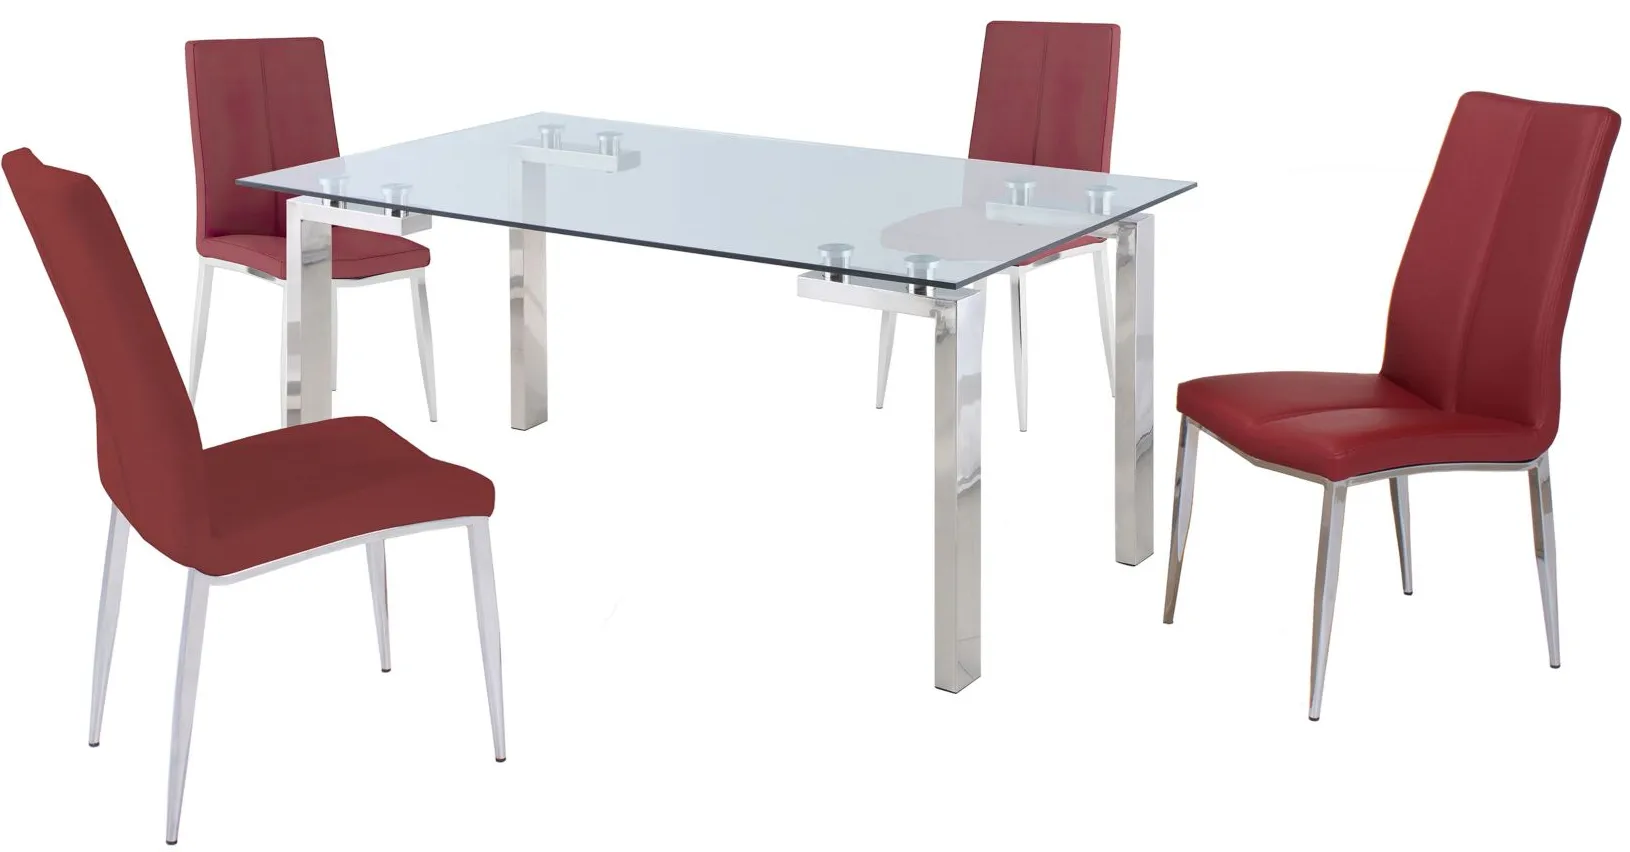 Cristina 5-pc. Dining Set in Red by Chintaly Imports